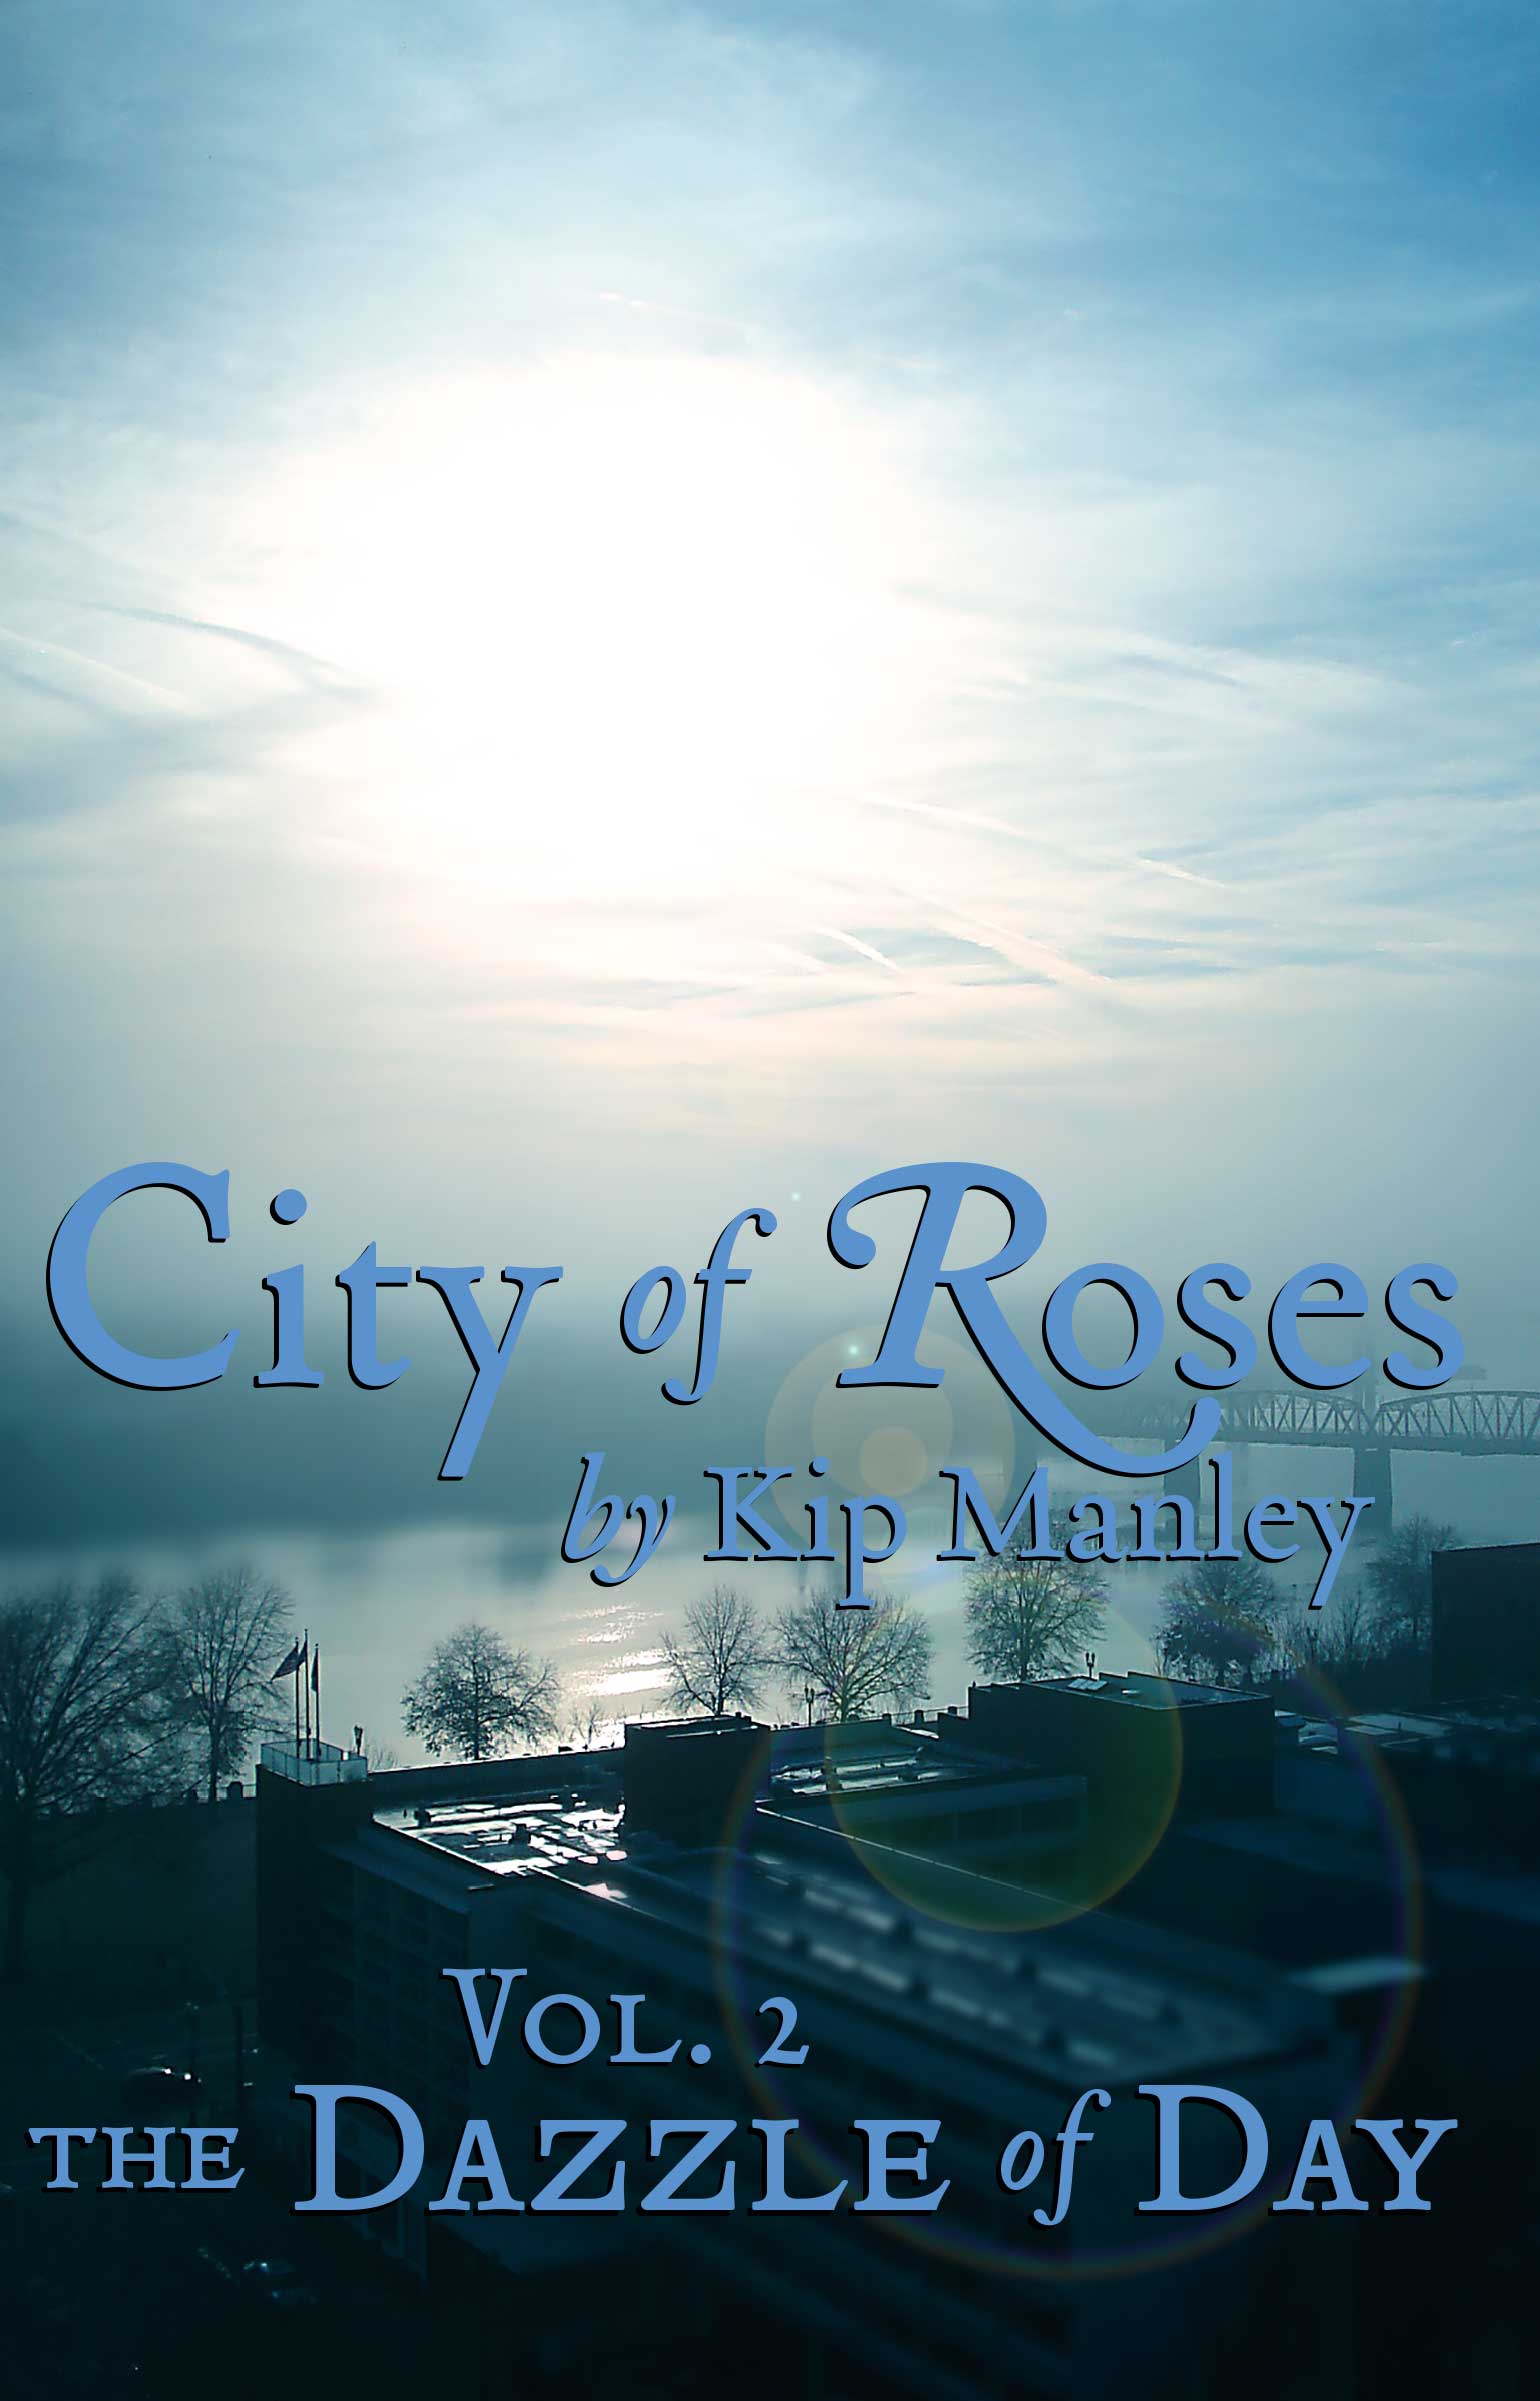 City of Roses vol 2 -- The Dazzle of Day by Kip Manley